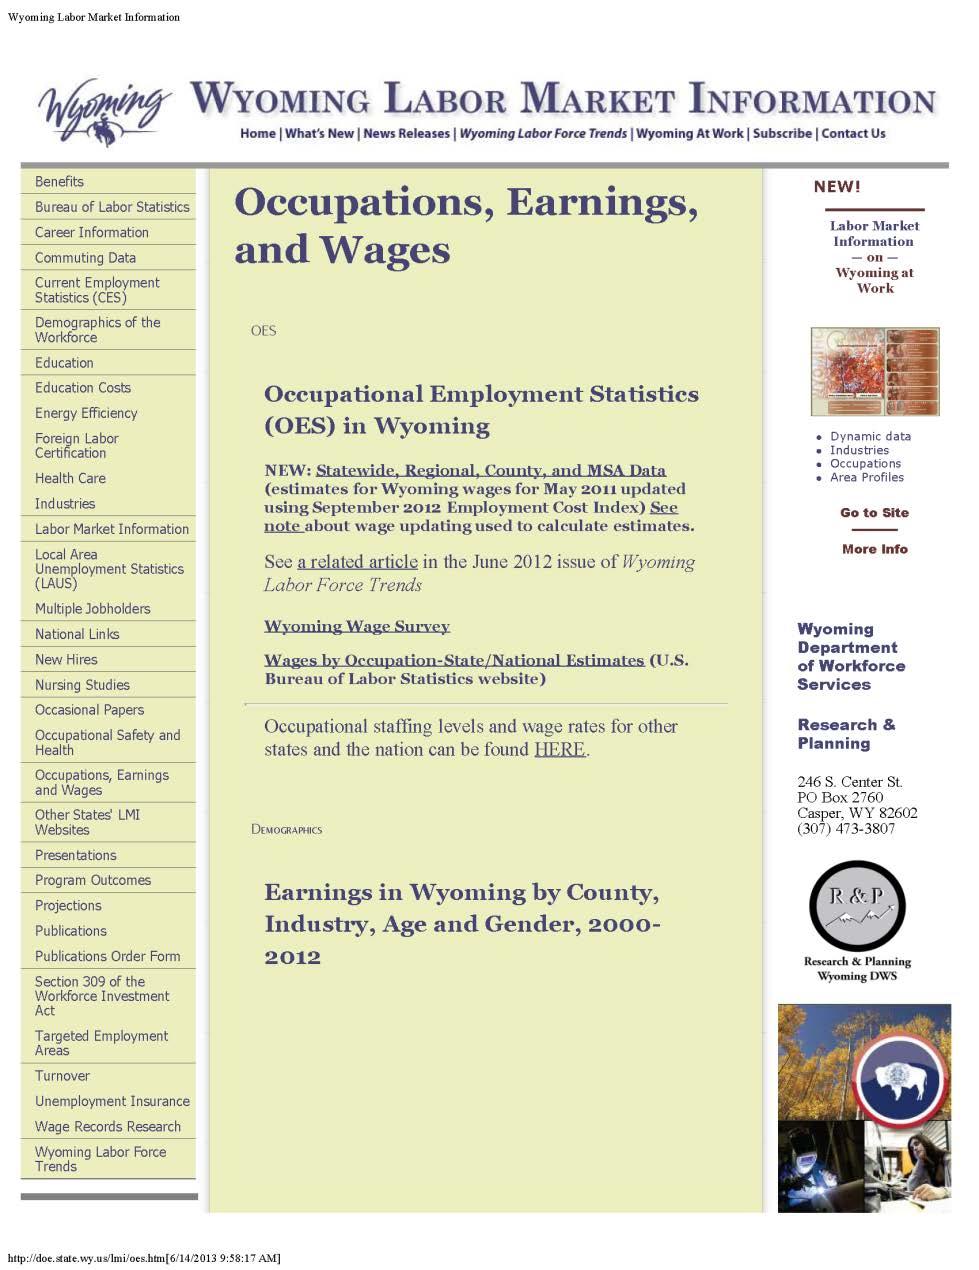 Occupational Employment Statistics (OES) Wage and